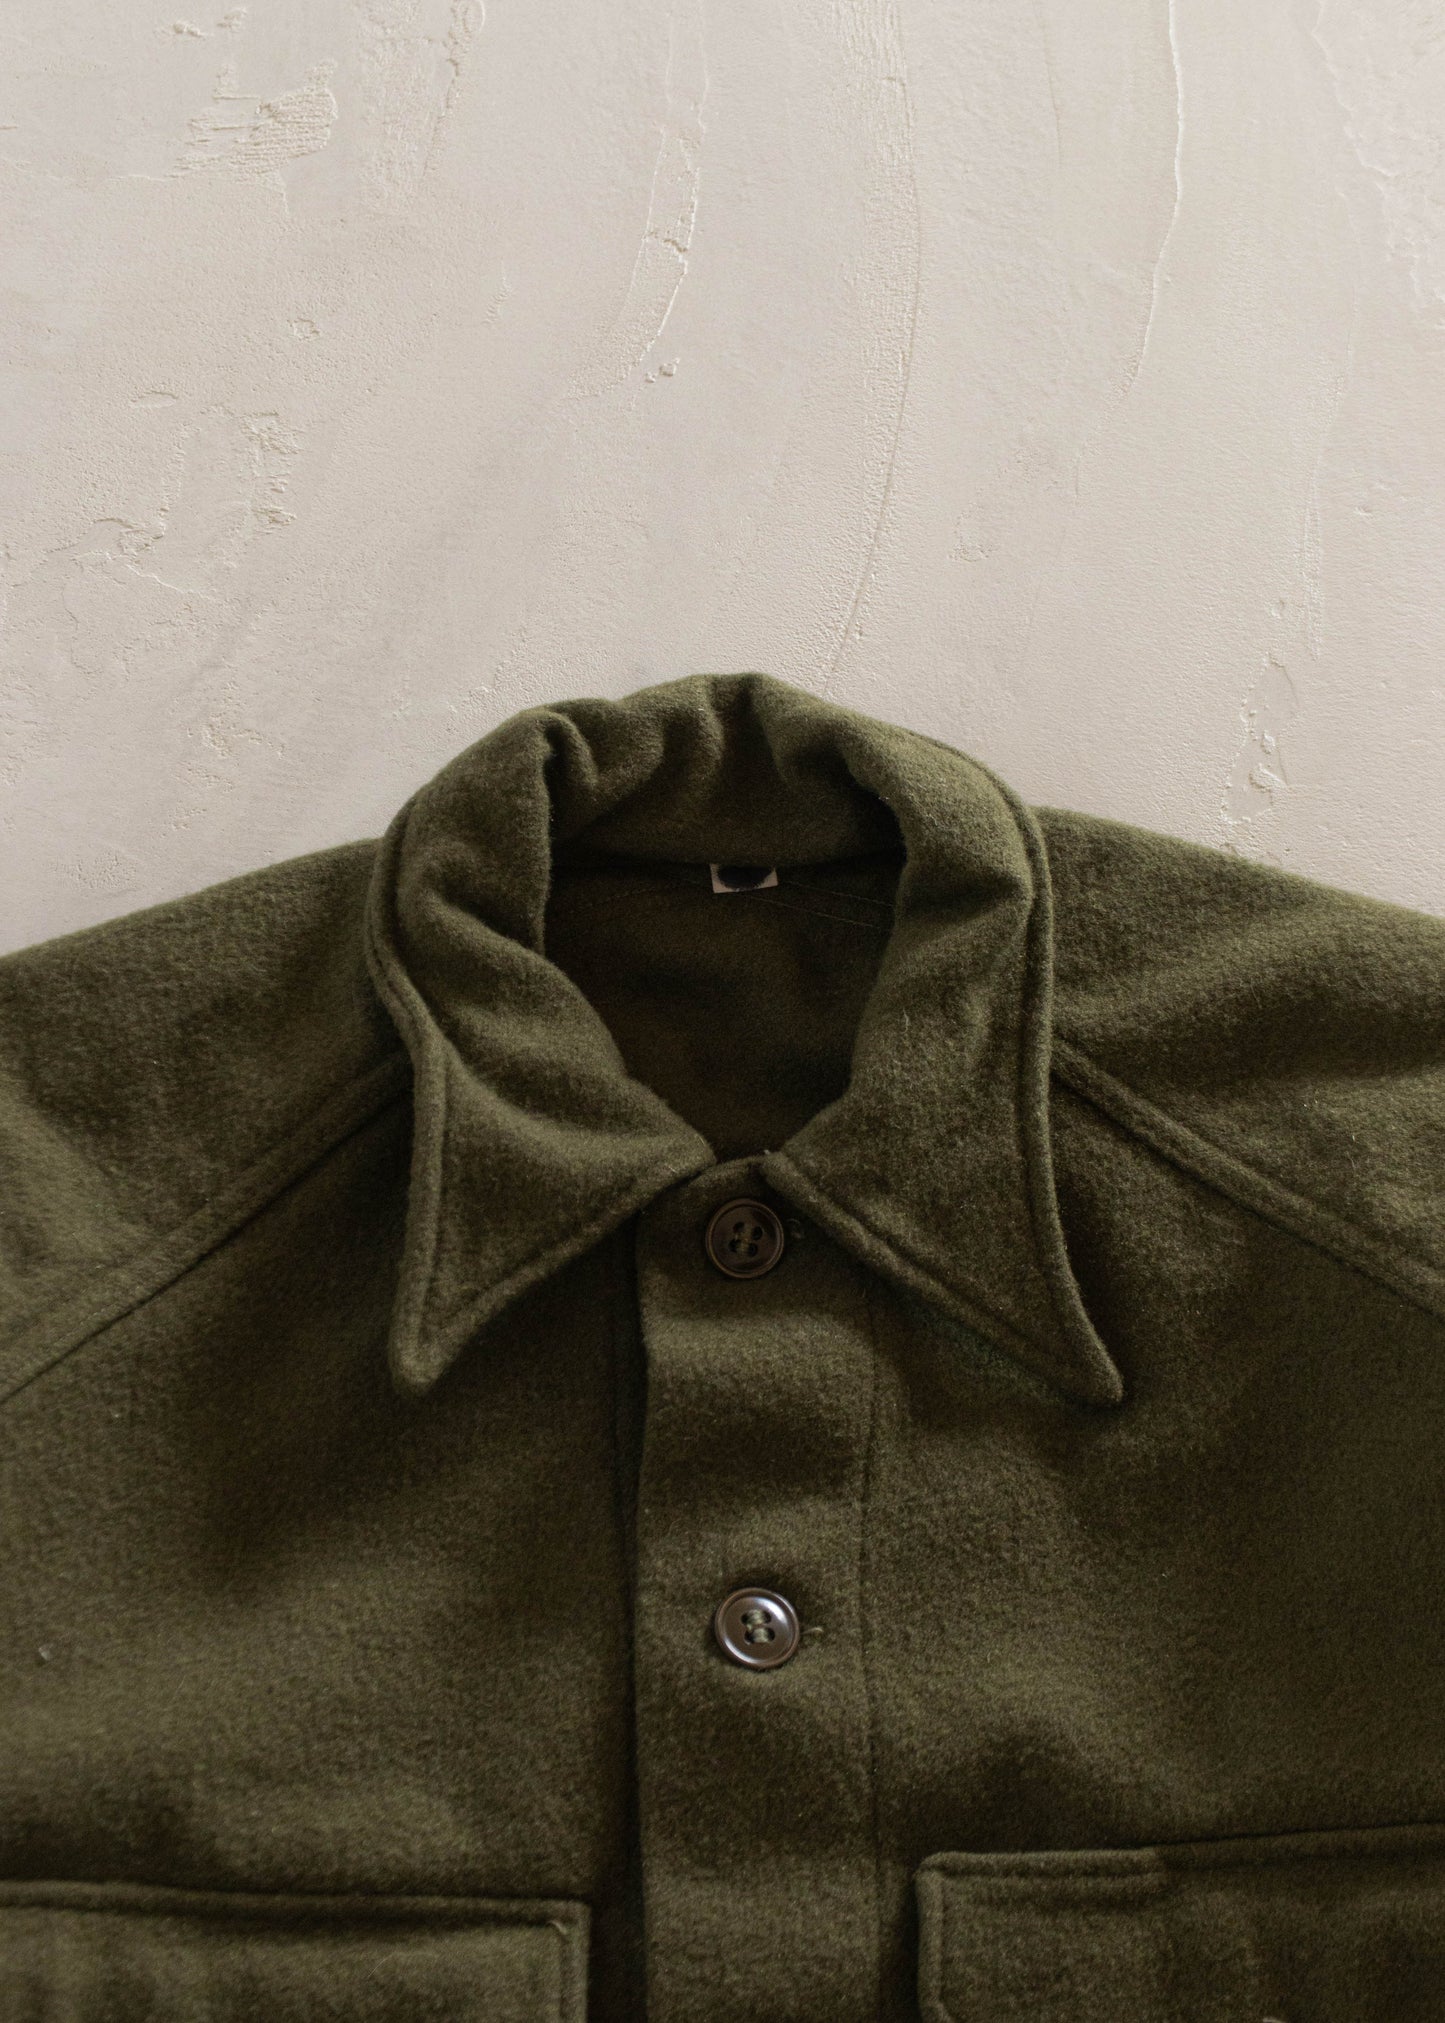 1980s Military Wool Button Up Shirt Size S/M